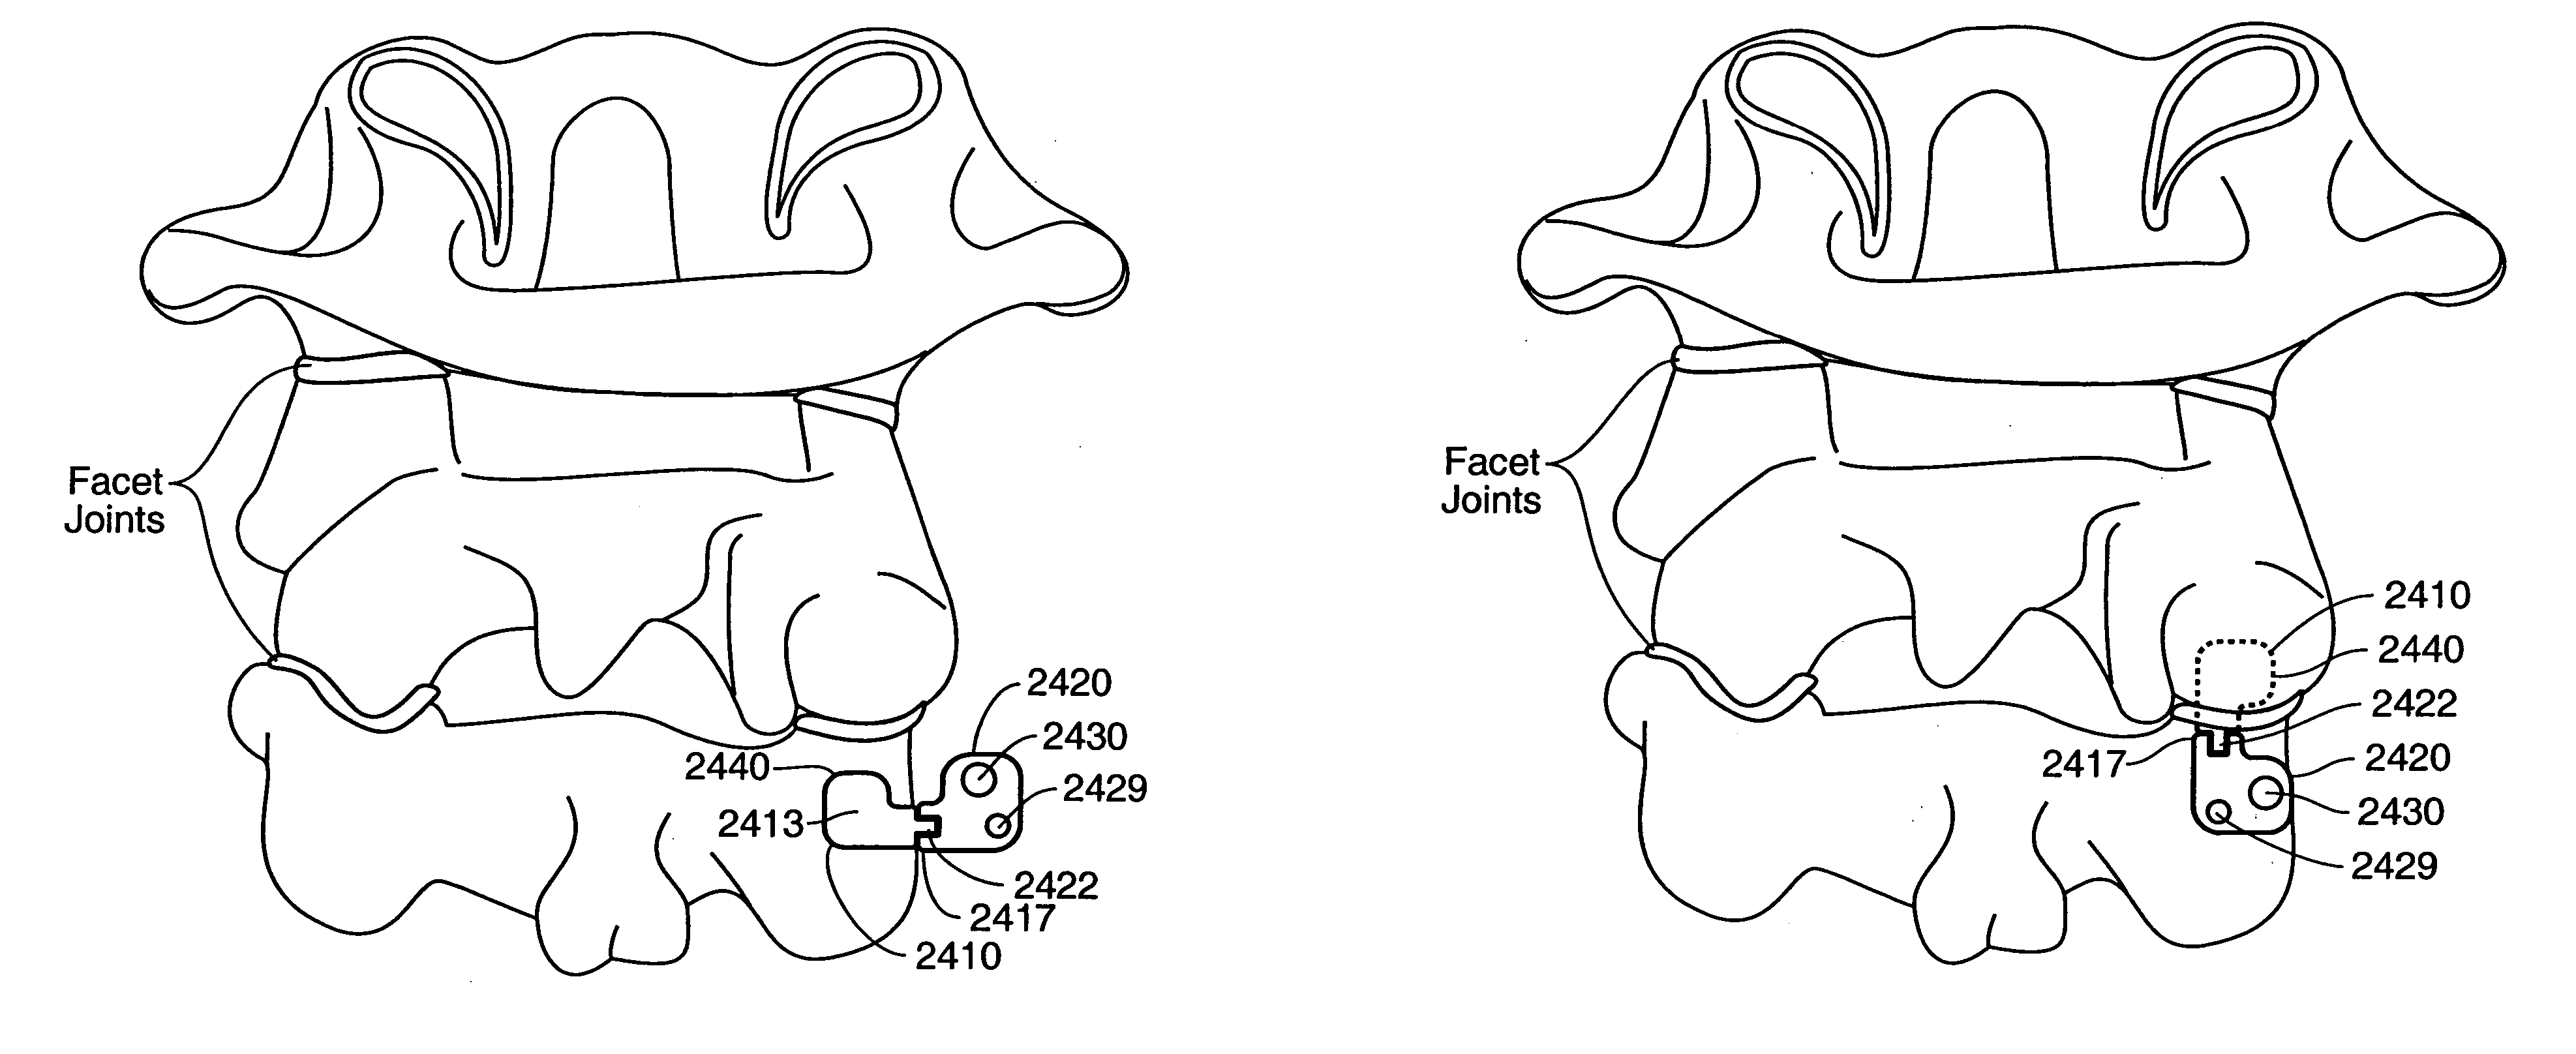 Inter-cervical facet implant and method for preserving the tissues surrounding the facet joint